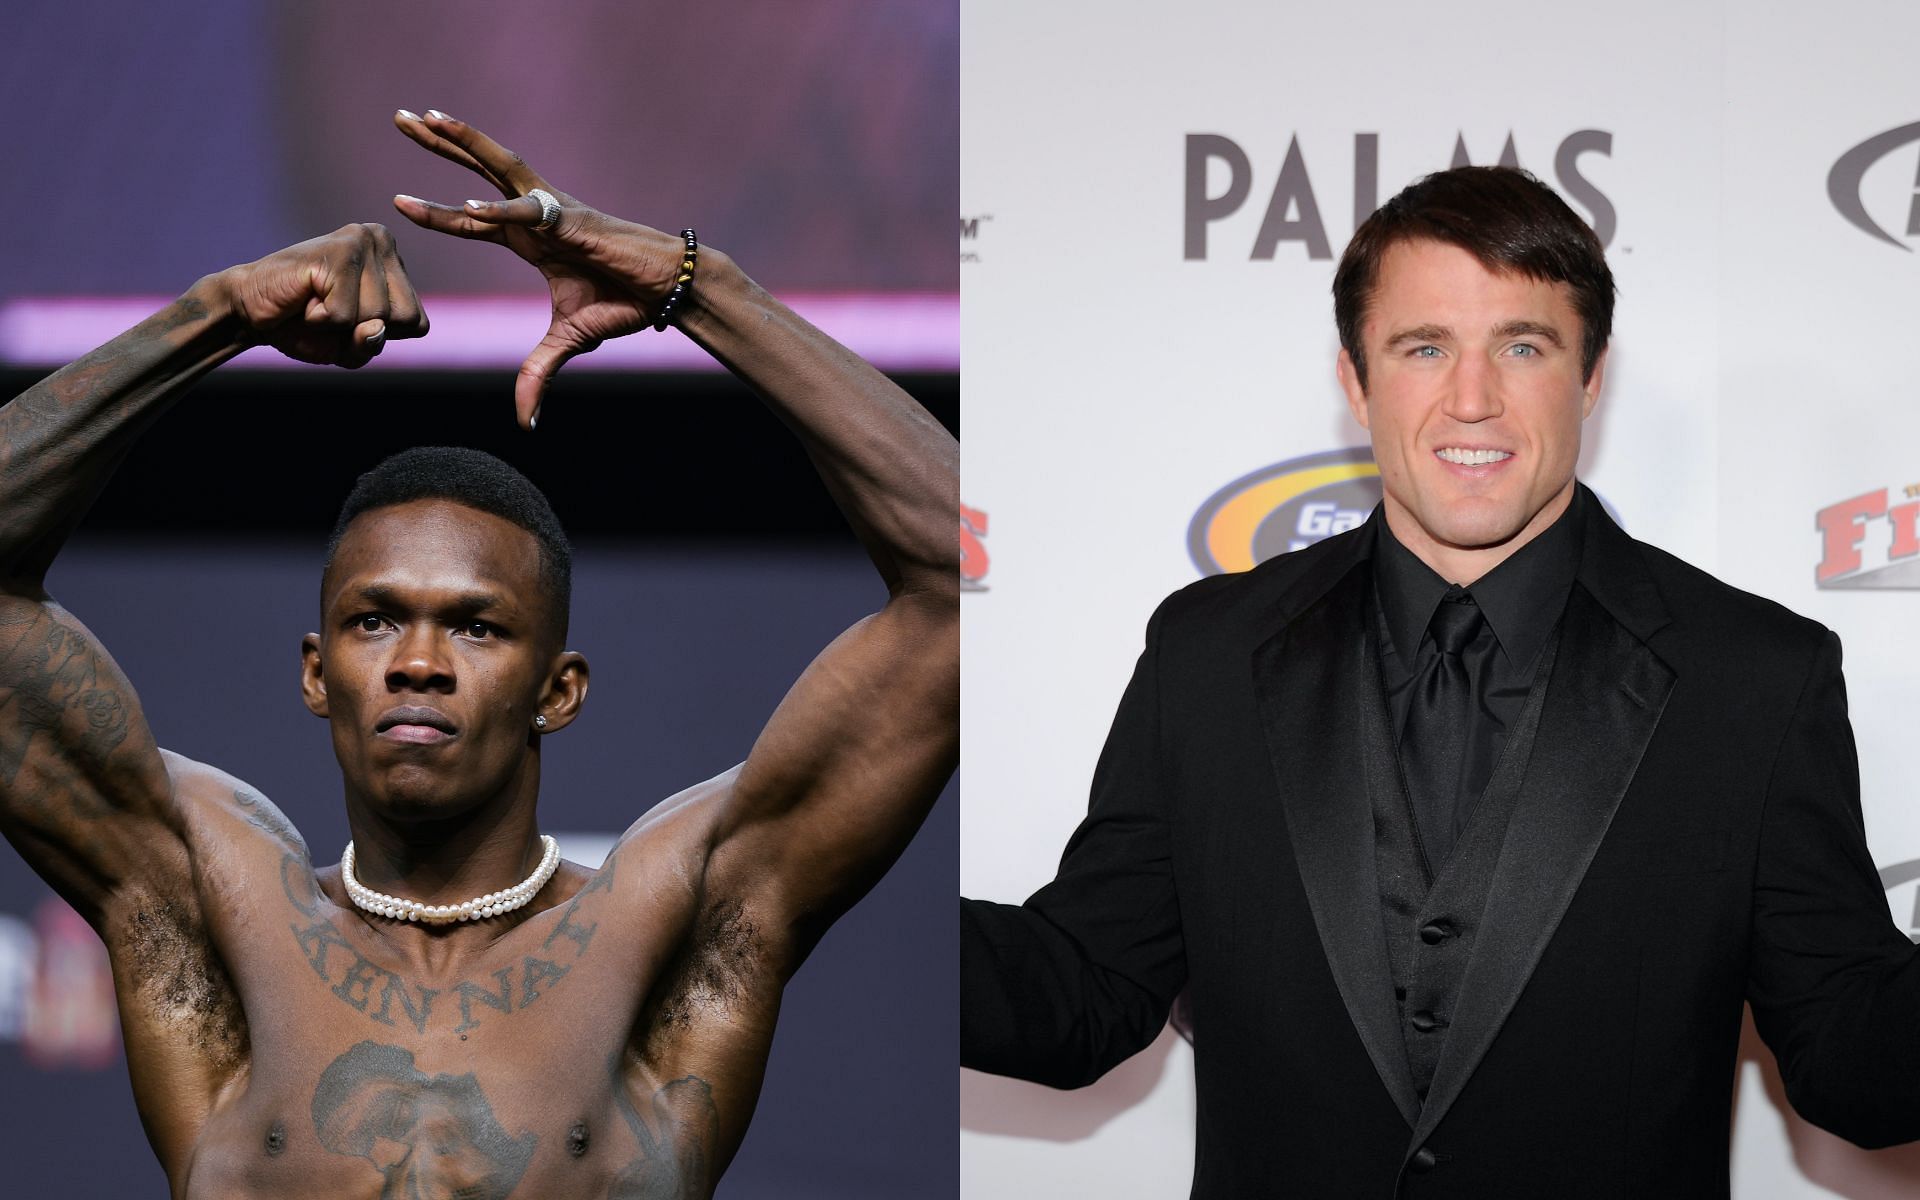 Israel Adesanya (left) and Chael Sonnen (right) [image courtesy: Getty Images]